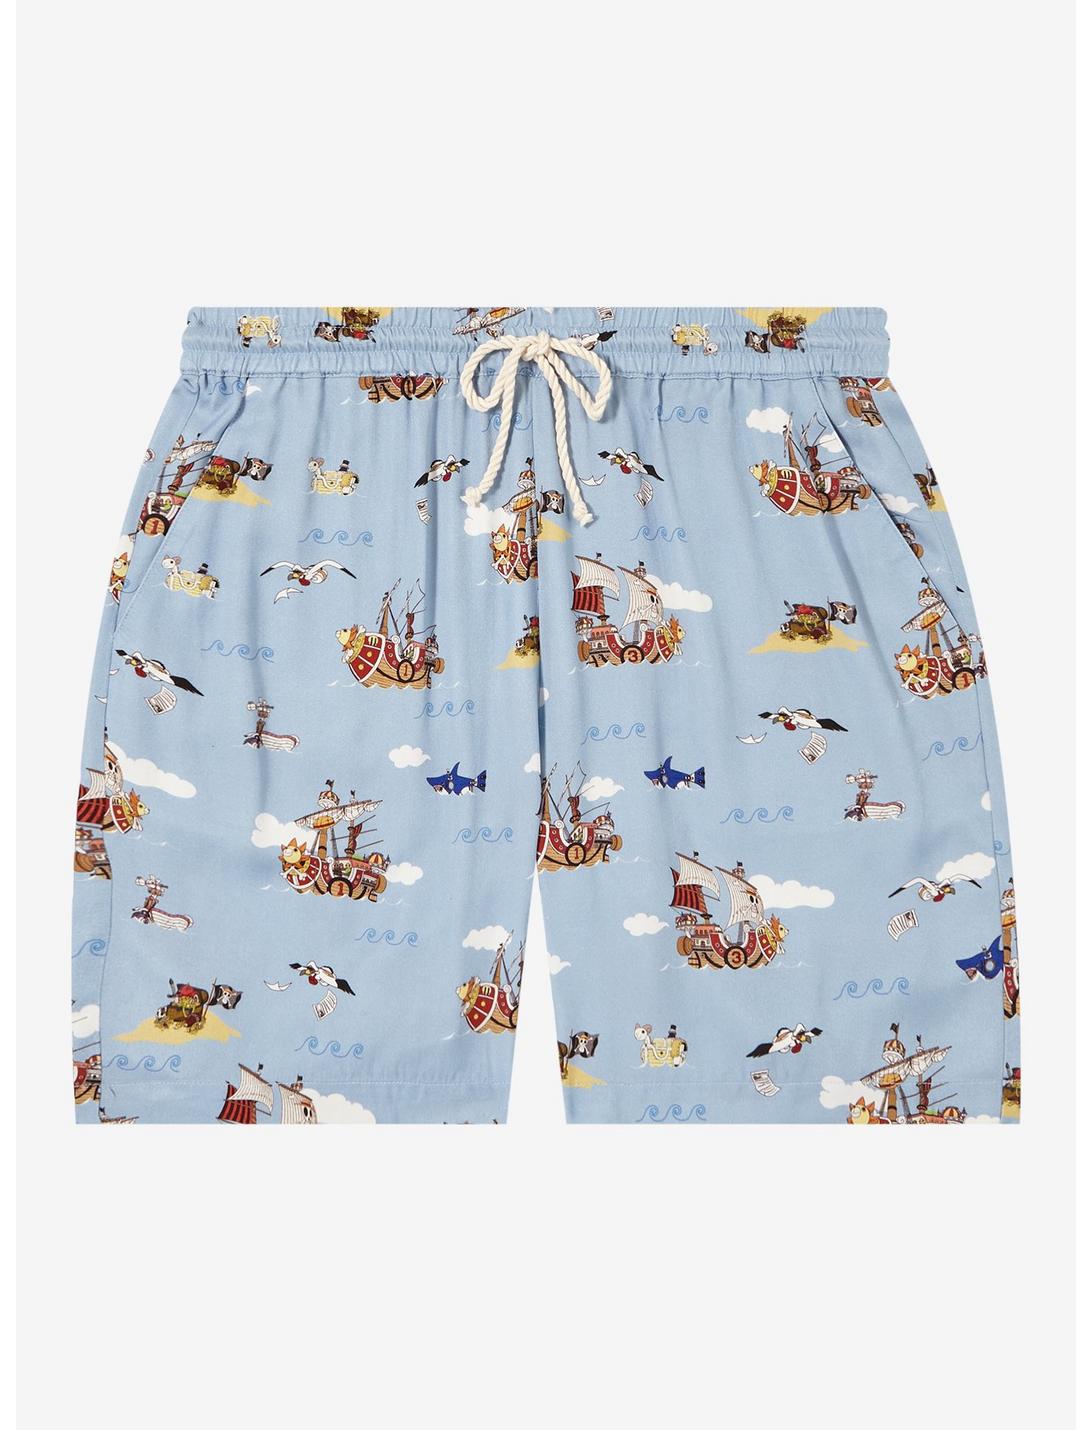 One Piece Ships Allover Print Woven Shorts - BoxLunch Exclusive, LIGHT BLUE, hi-res